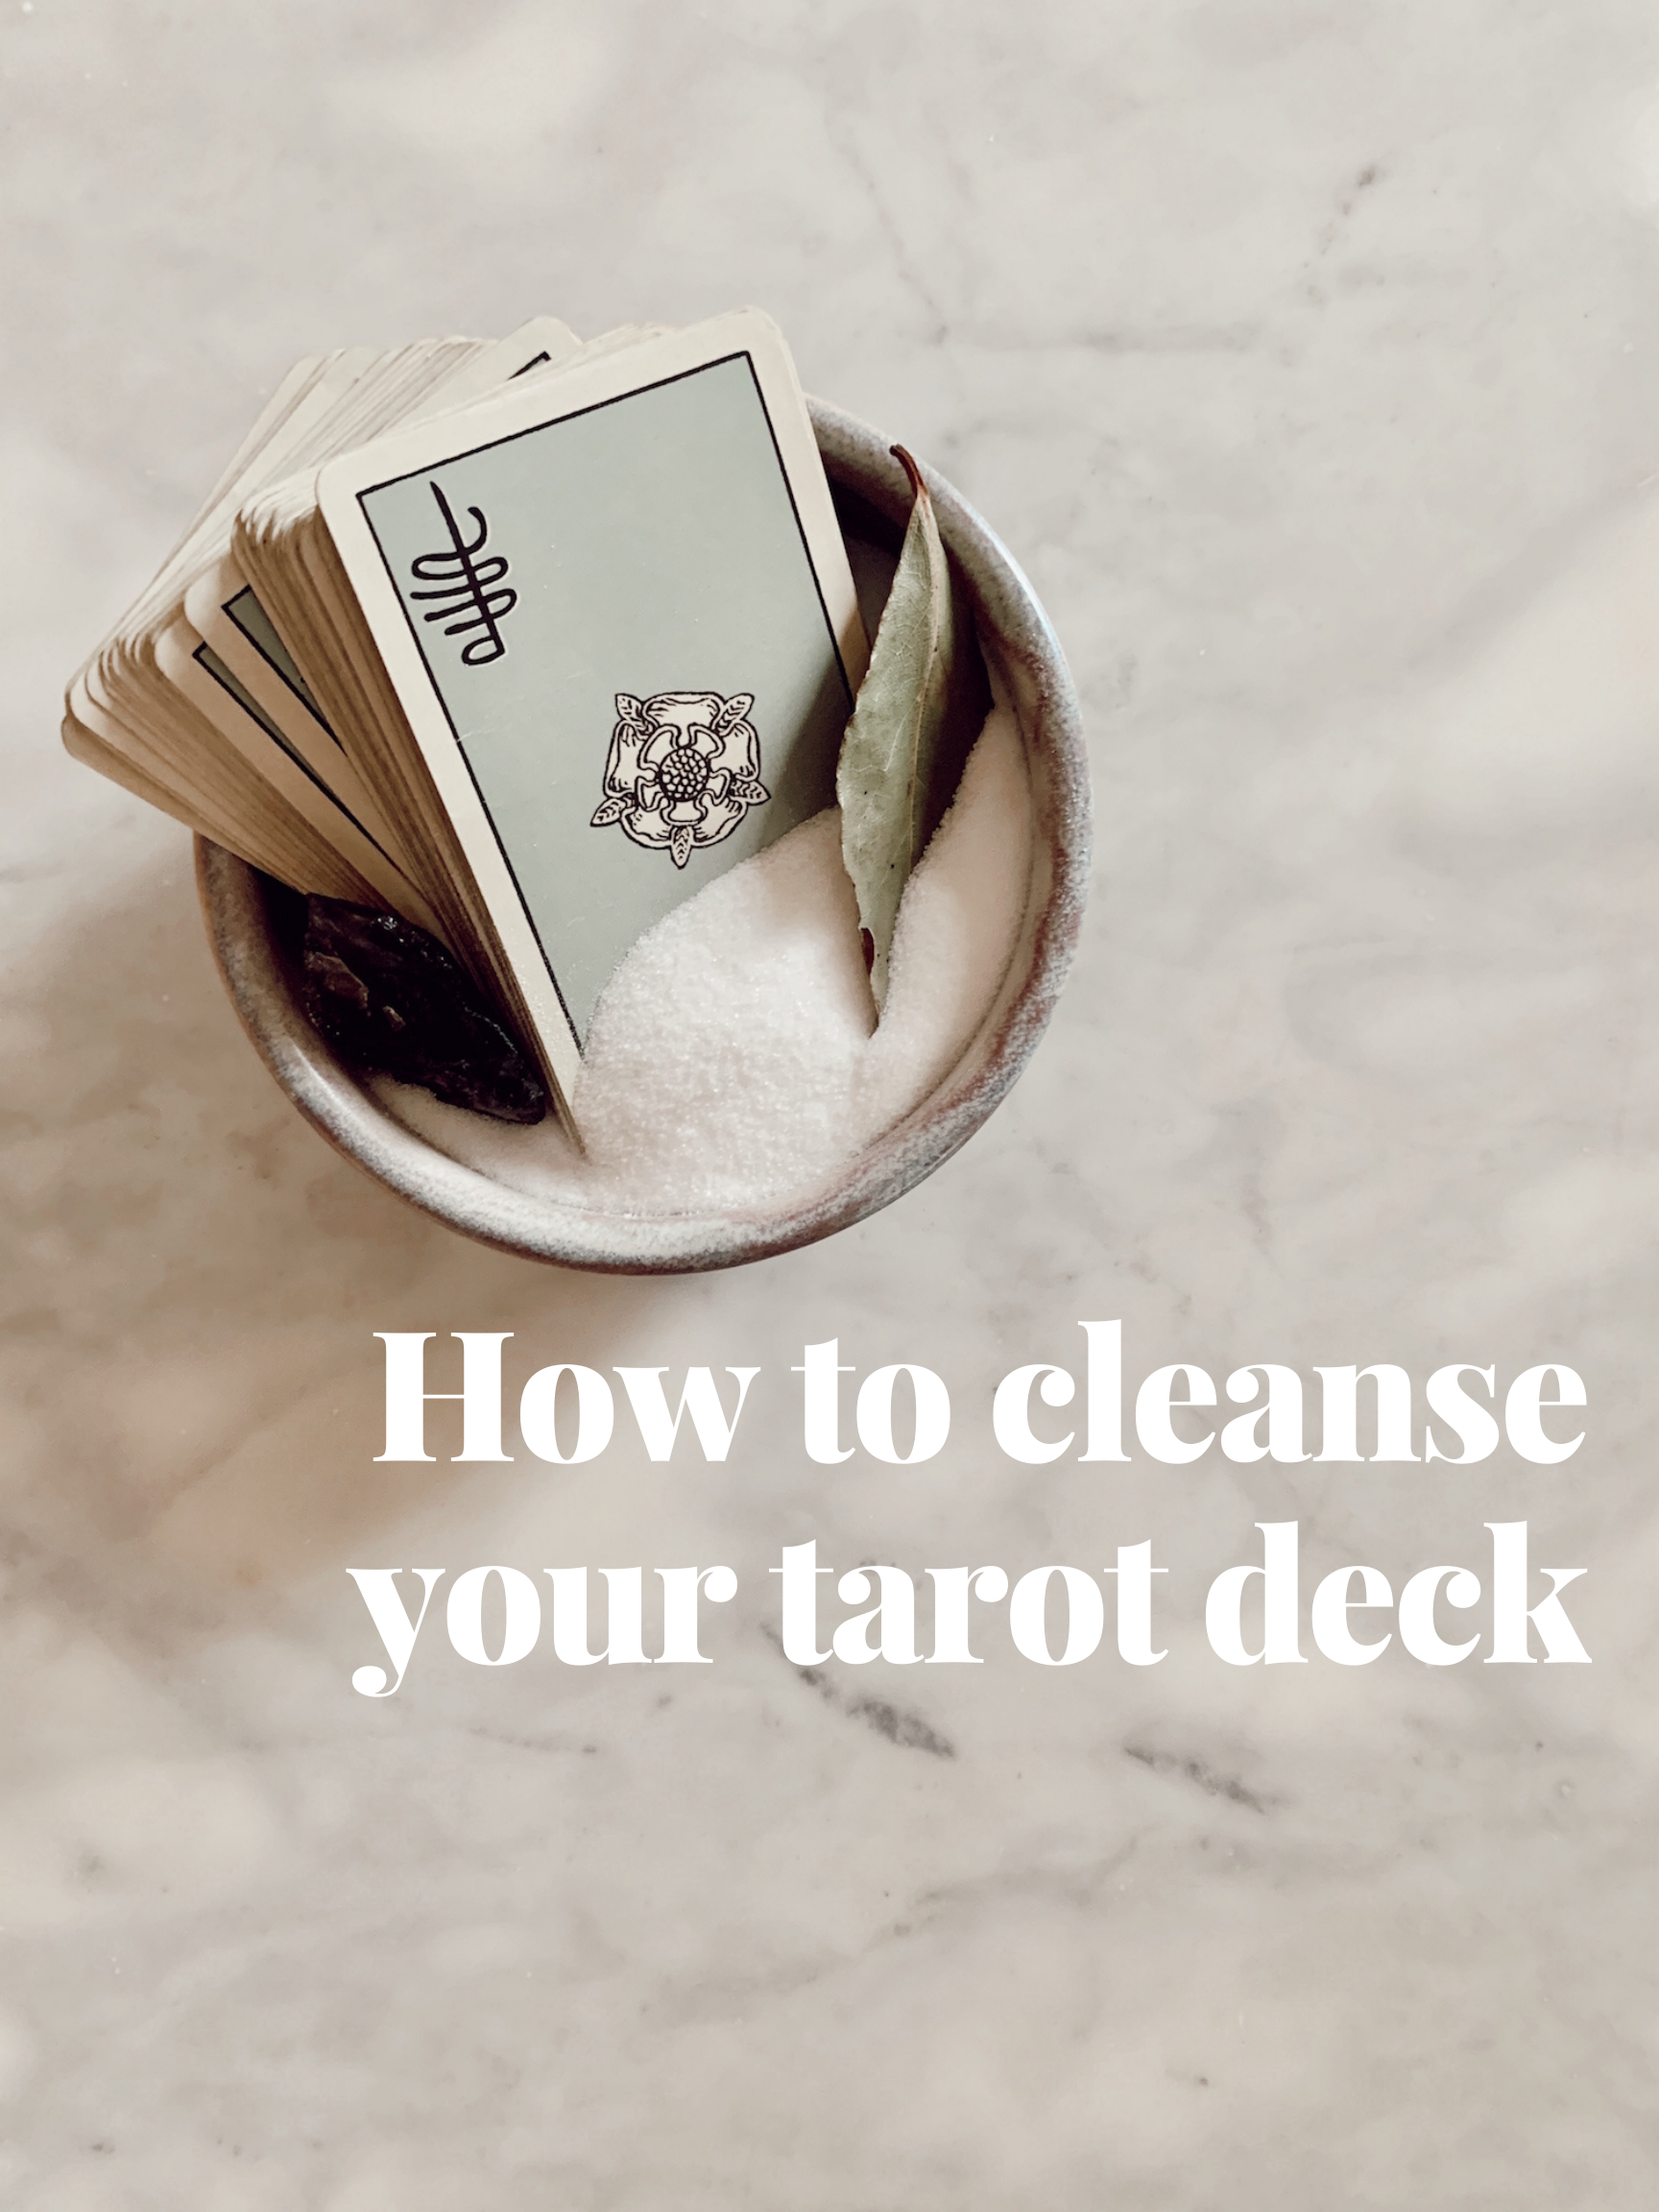 How to cleanse tarot cards